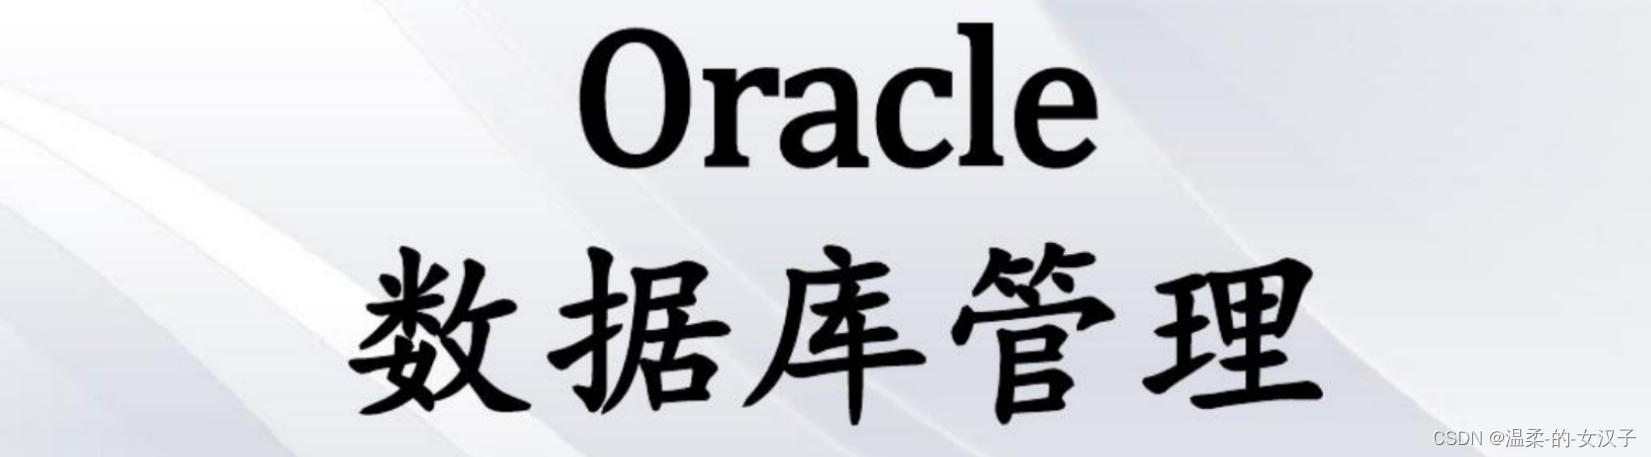 Oracle数据库如果<span style='color:red;'>出现</span><span style='color:red;'>乱</span><span style='color:red;'>码</span>，需要查看是否<span style='color:red;'>时</span>字符集不一致<span style='color:red;'>导致</span><span style='color:red;'>乱</span><span style='color:red;'>码</span>，这样解决